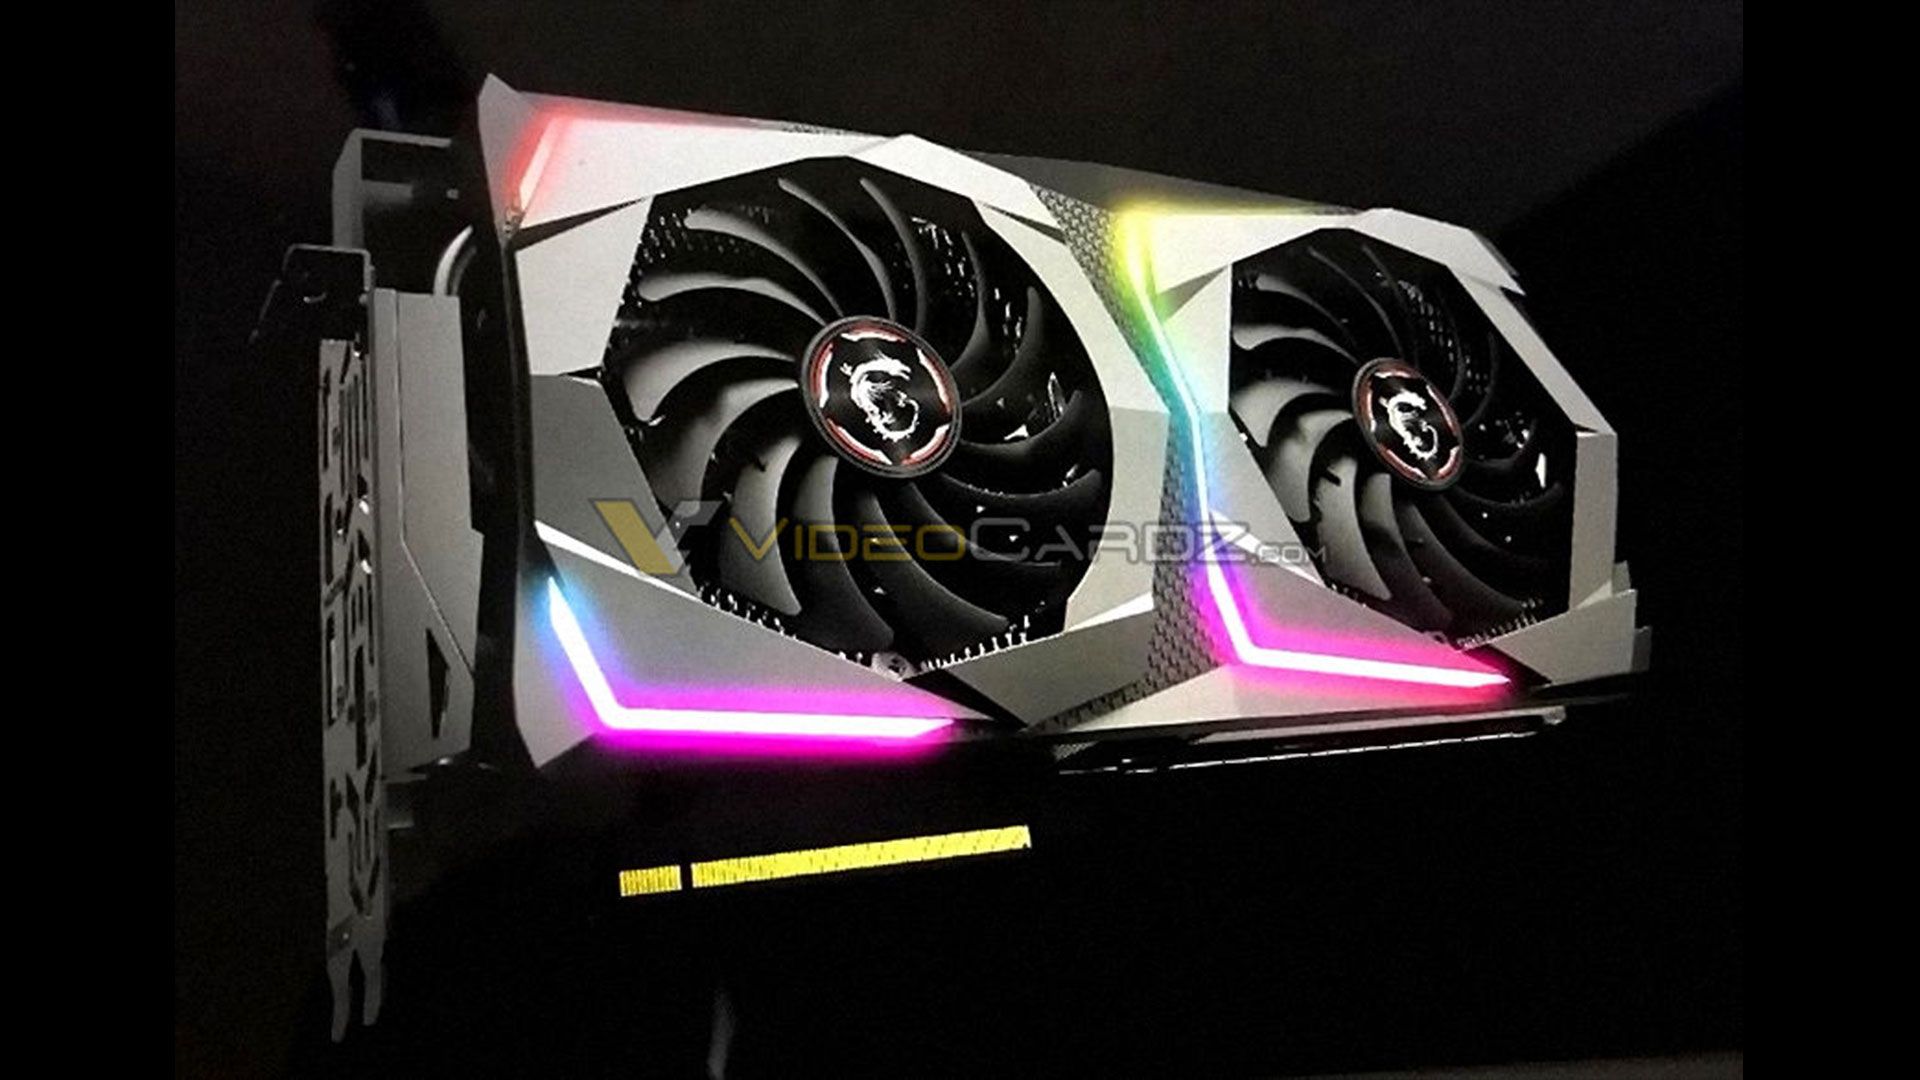 MSI RTX 2070 Gaming X with two fans leaked out. PC Builder's Club